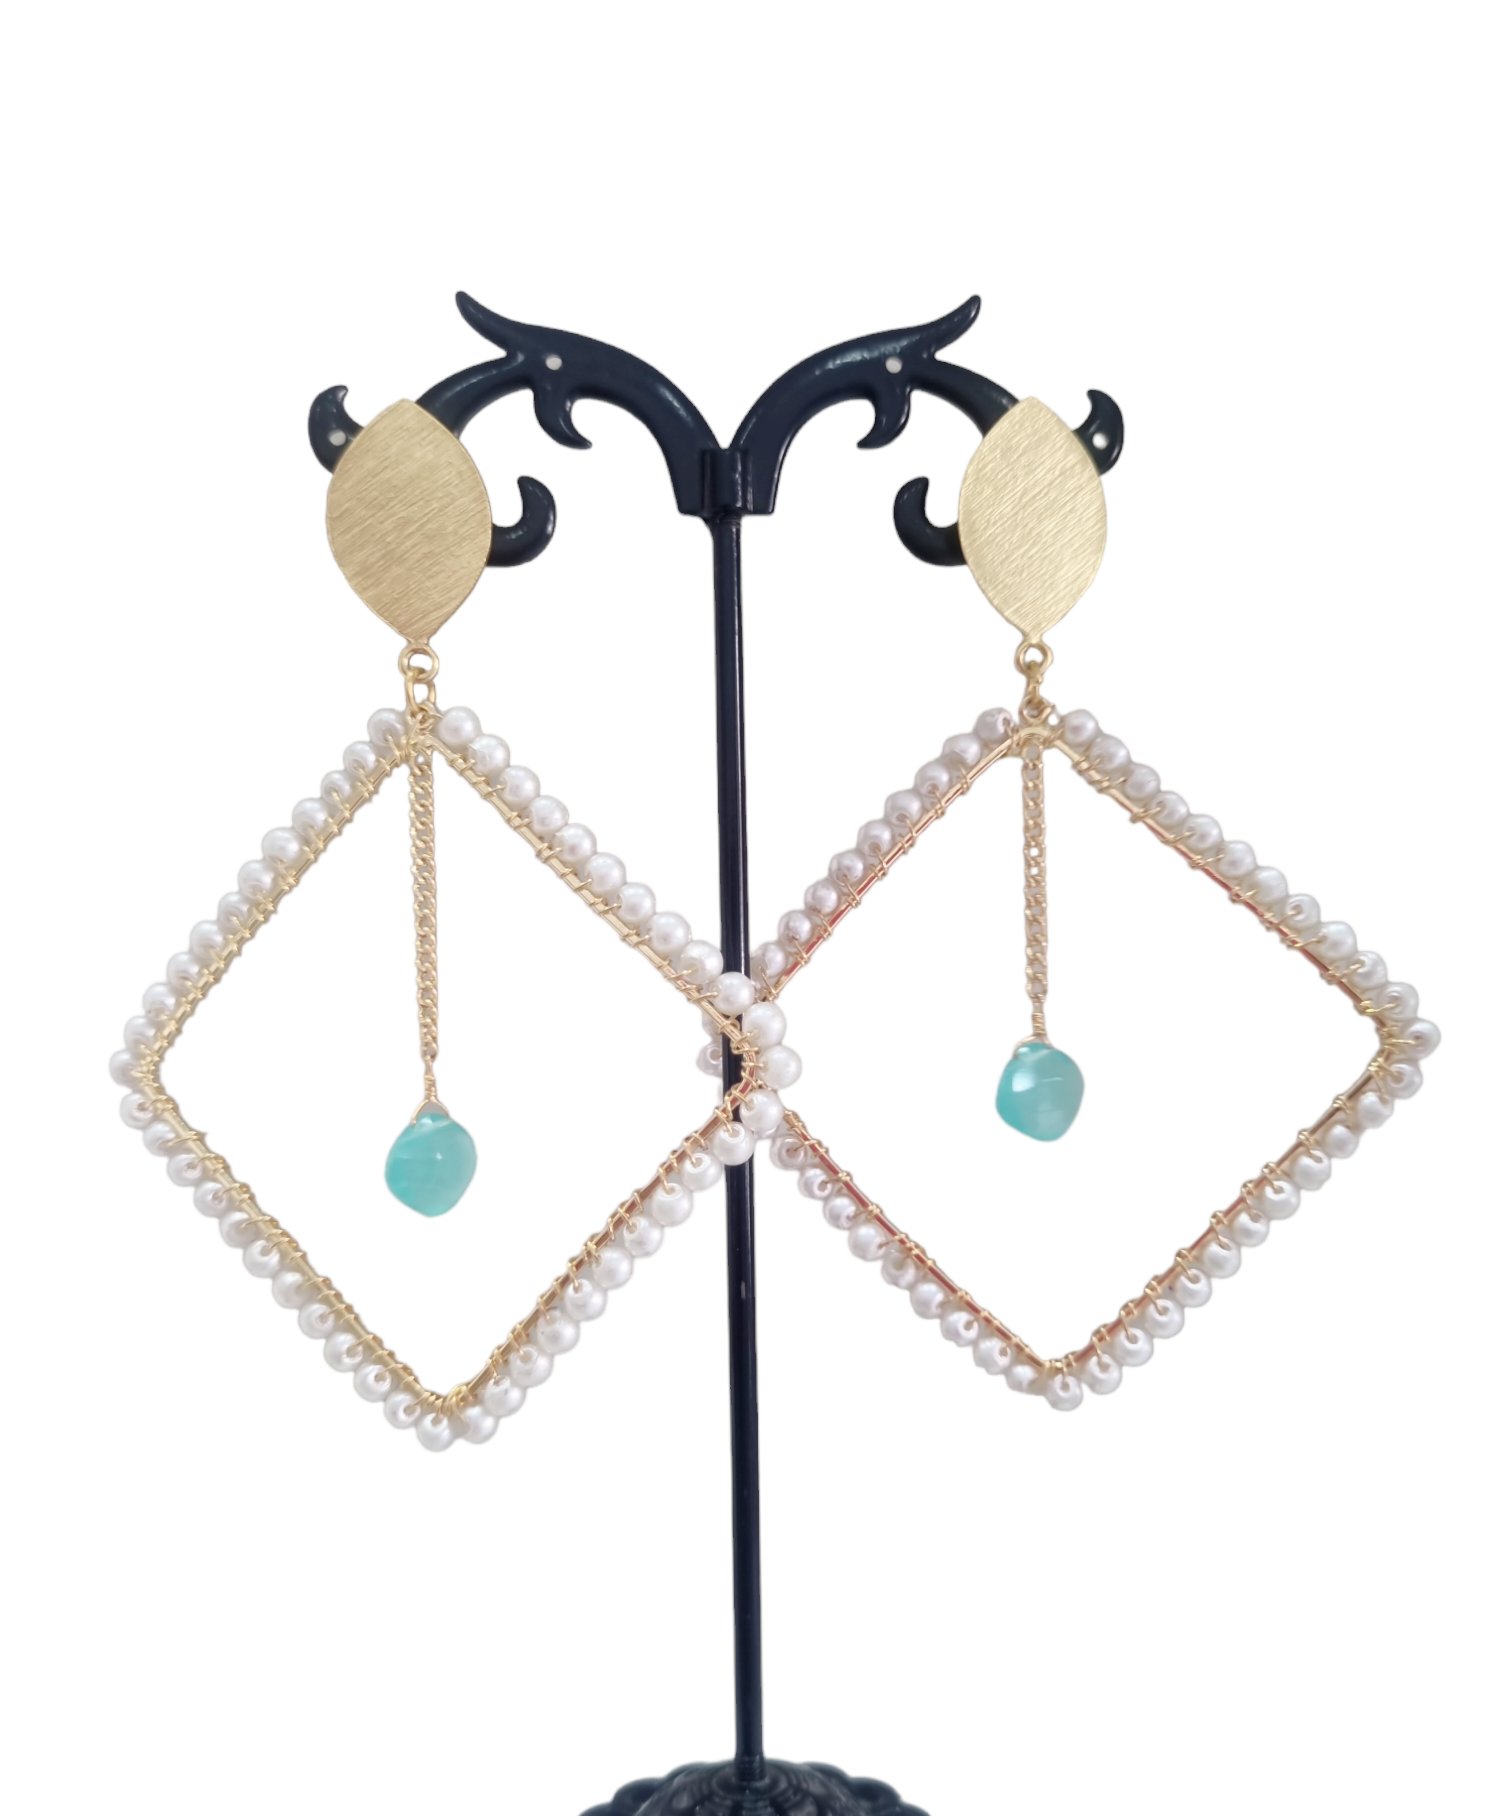 Earrings made with Majorca pearls and quartz. Golden brass elements. Length 8.5cm Weight 6.8gr